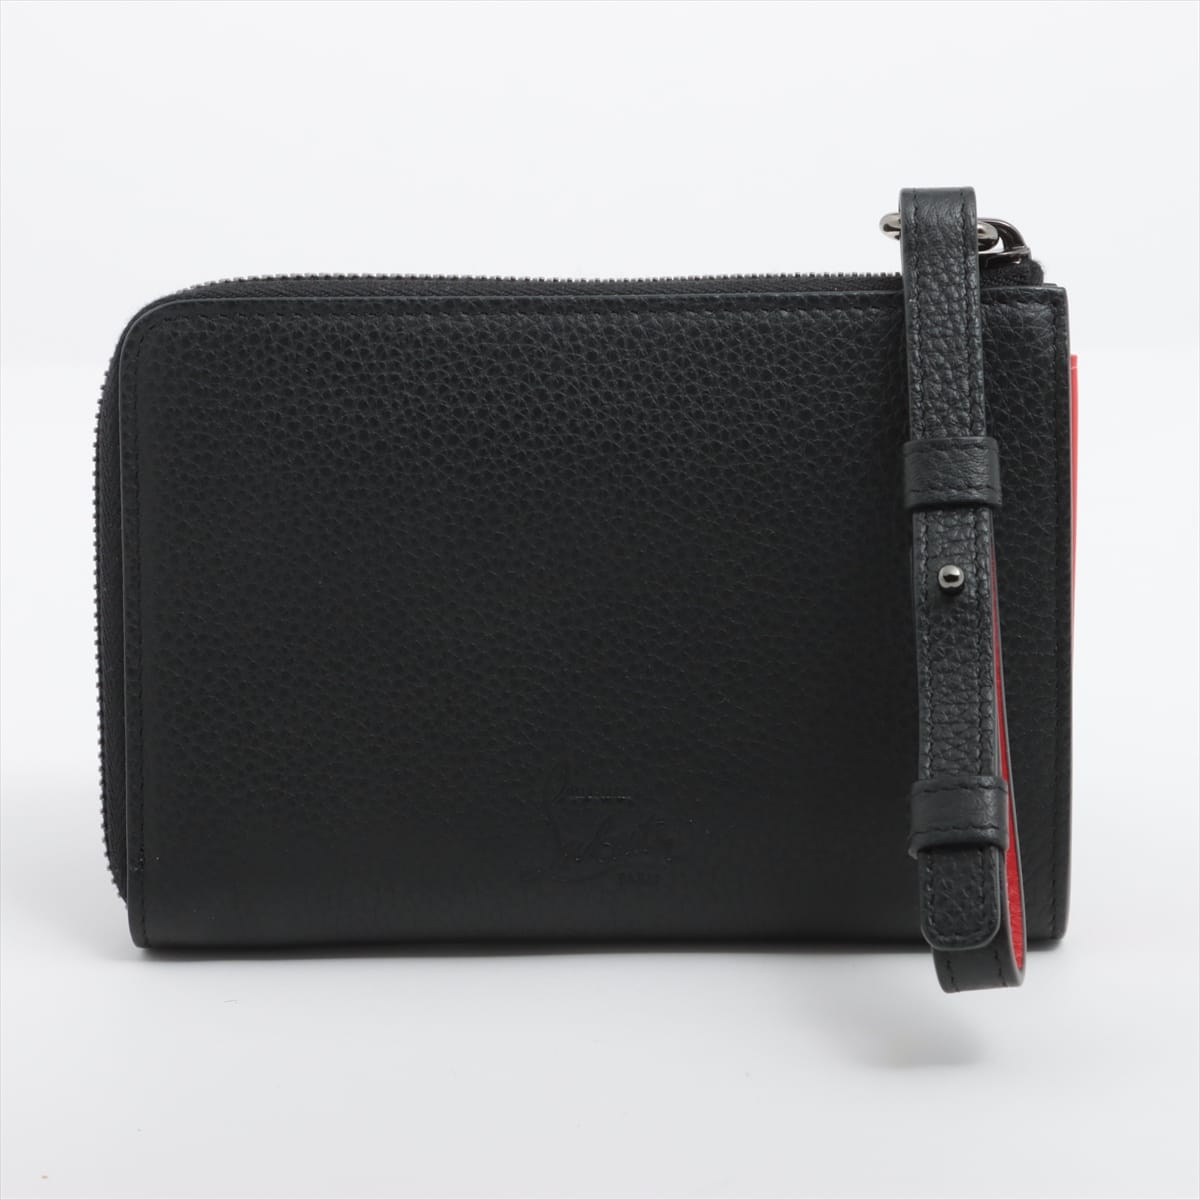 Christian Louboutin Studs Leather Compact Wallet Black